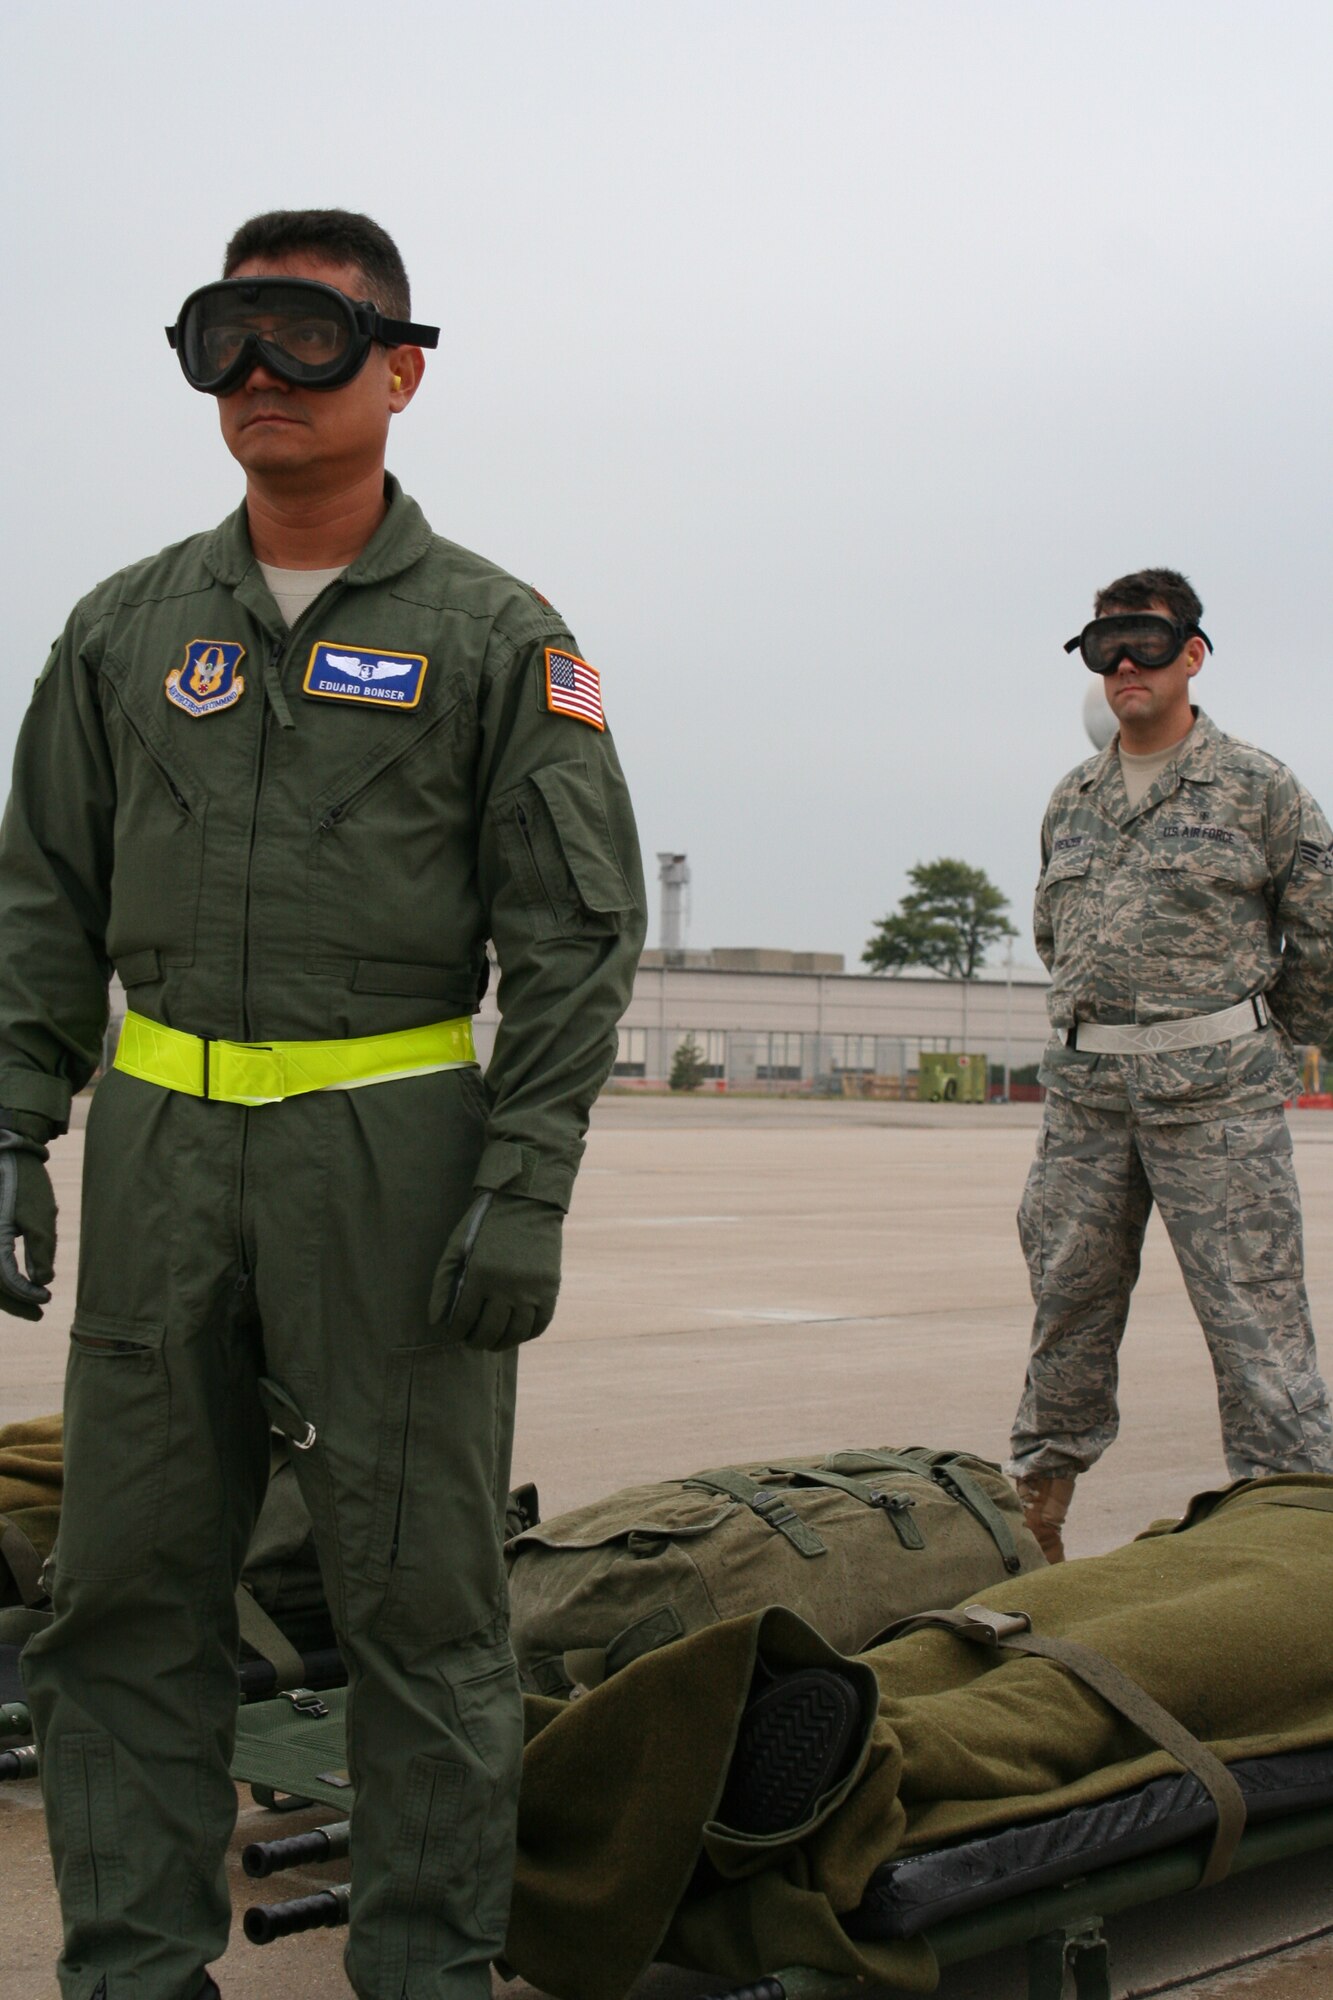 WRIGHT-PATTERSON AIR FORCE BASE, Ohio - Maj. Eduard Bonser and Senior Airman Wolfgang Krenzer, both from the 445th Aeromedical Evacuation Squadron, await the signal from the aeromedical evacuation operations officer to transfer a litter patient to the aircraft while “hot loading” patients onto a waiting C-130 Hercules from Youngstown Air Reserve Station, Ohio, with its engines running. Sixteen reservists from AES participated in a three-day training event that involved loading and unloading patients and equipment onboard the aircraft and using simulated patients to run medical and aircraft emergency scenarios while in flight. (U. S. Air Force photo/Capt. Rodney McNany) 